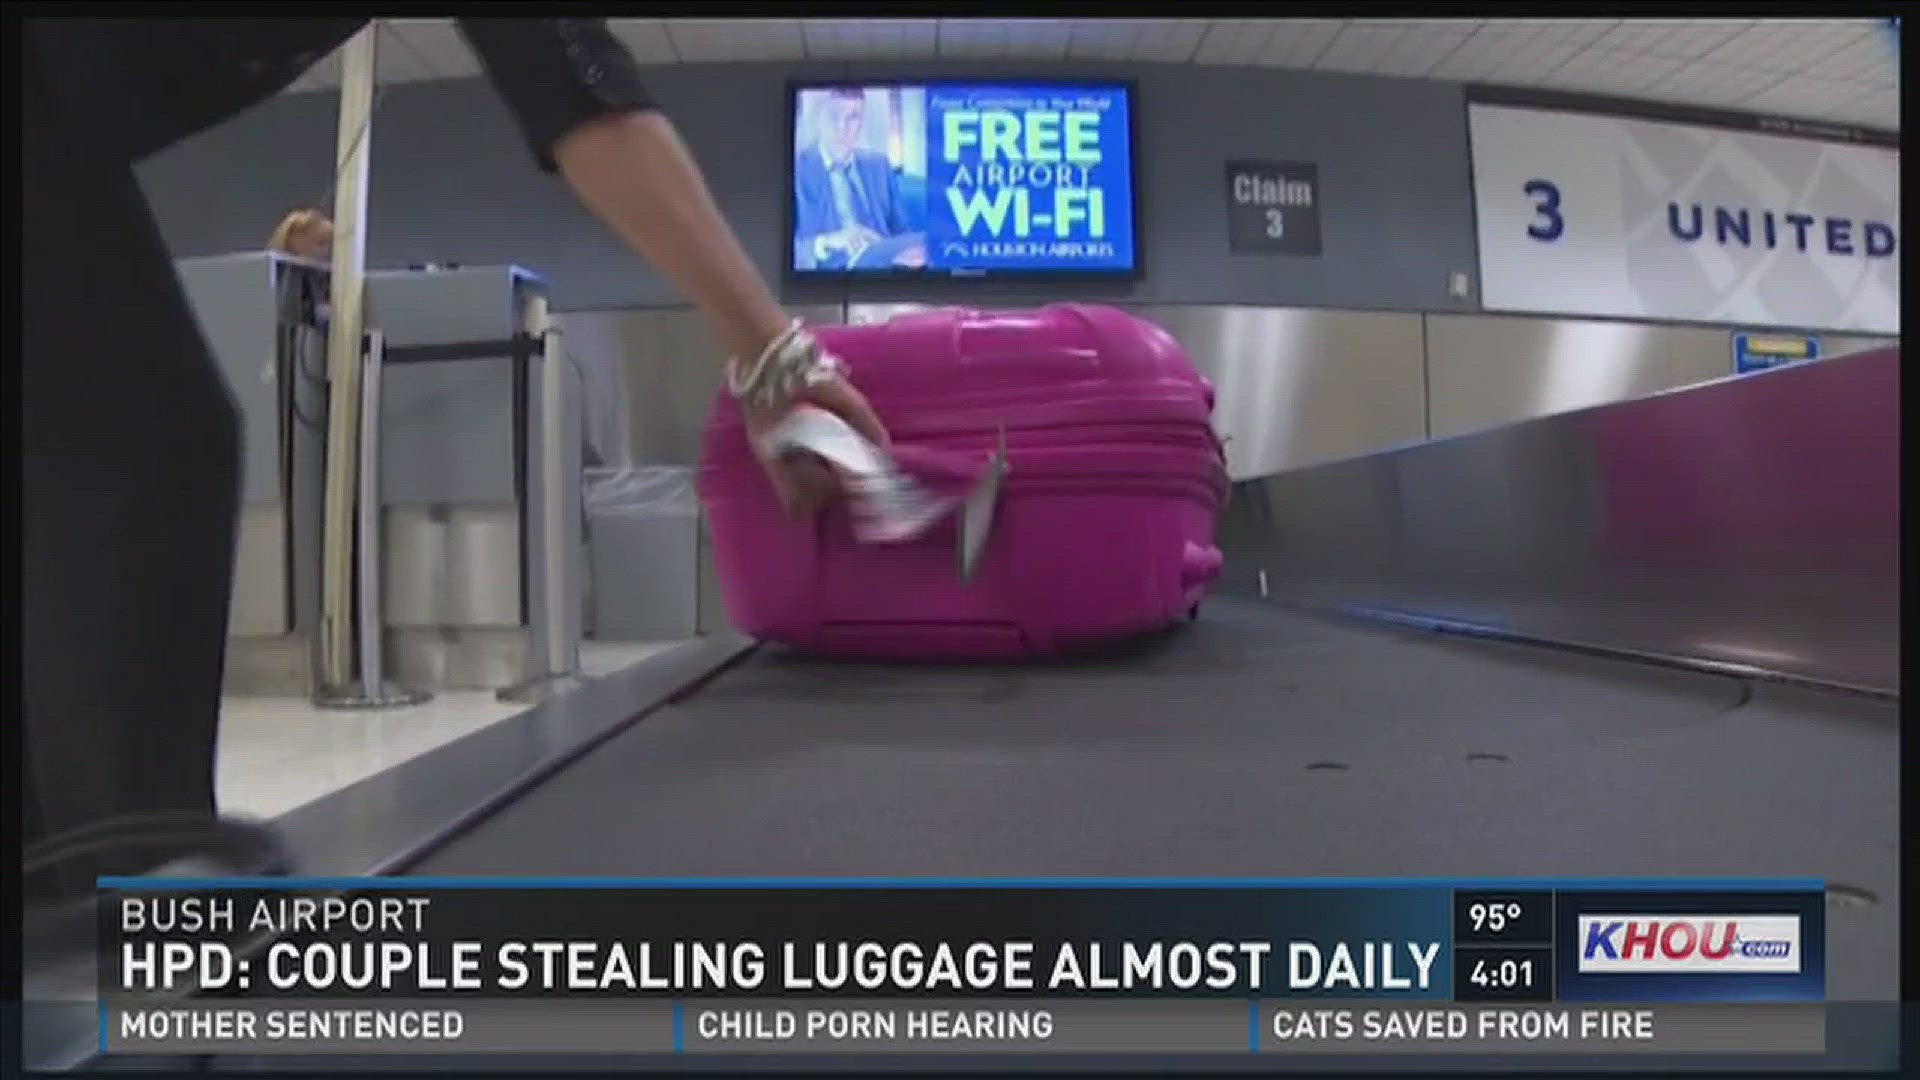 HPD: Suspects stole lugagge from Bush IAH daily for six months | khou.com